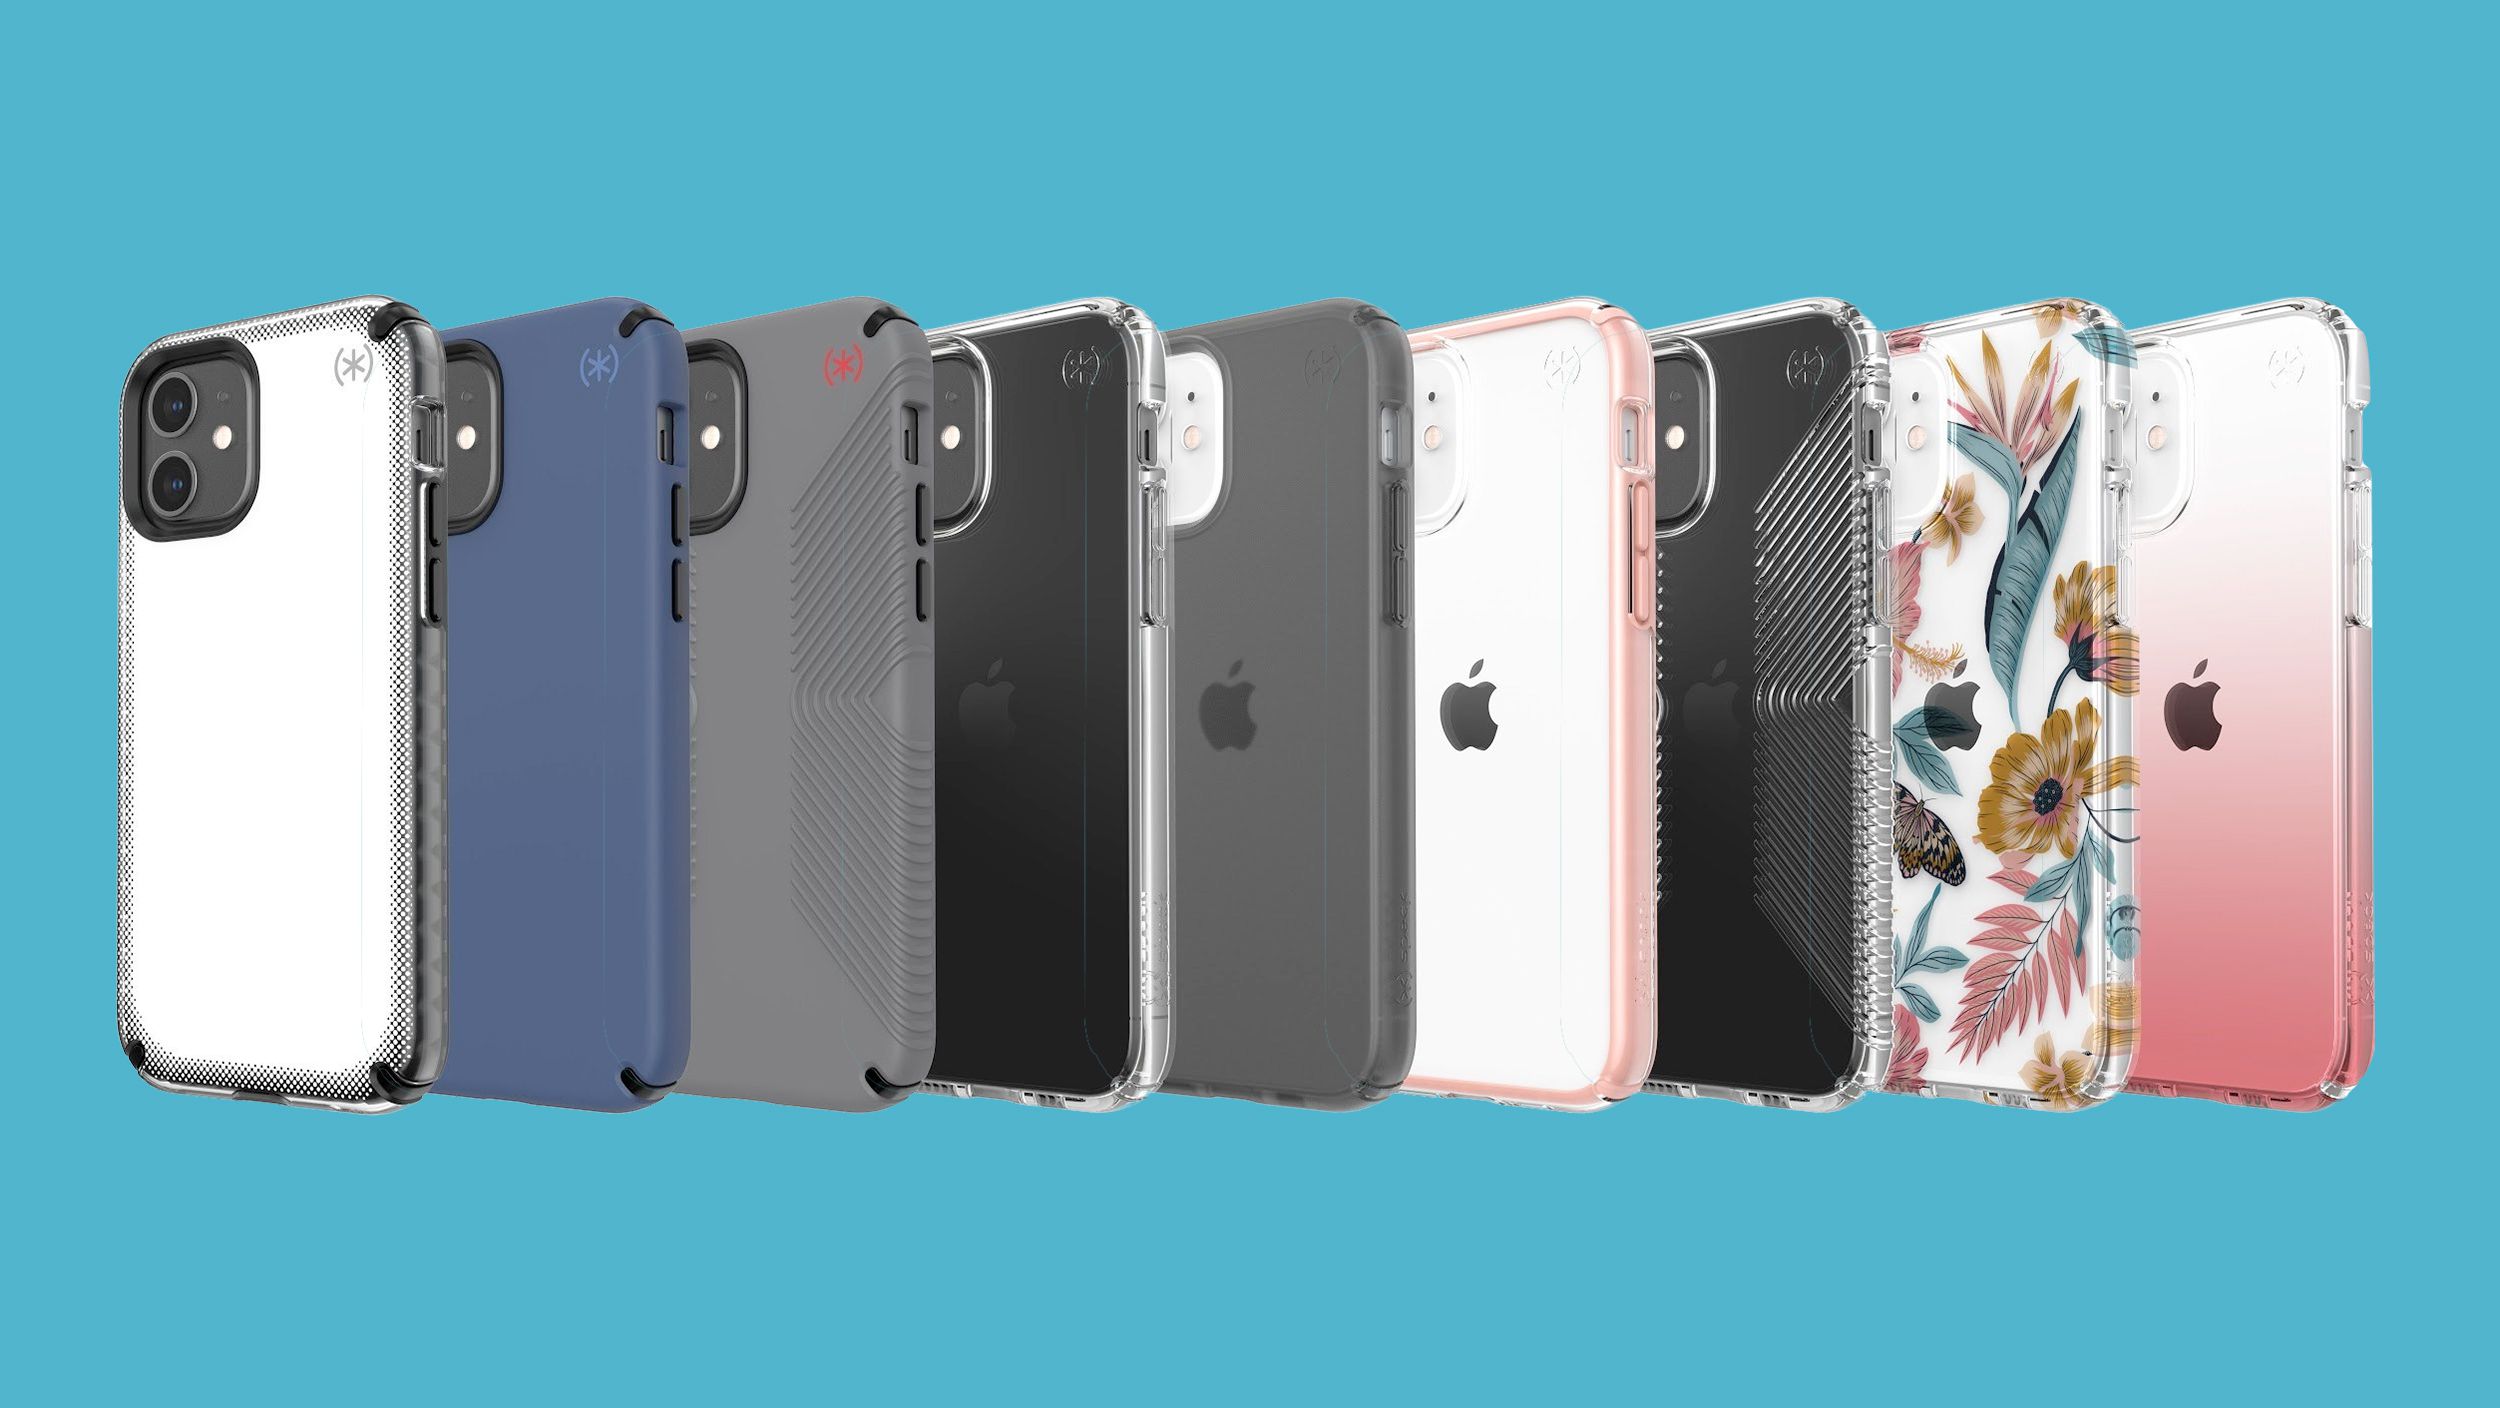 Best iPhone 12 Cases: Most Protective iPhone 12 and 12 Pro Cases